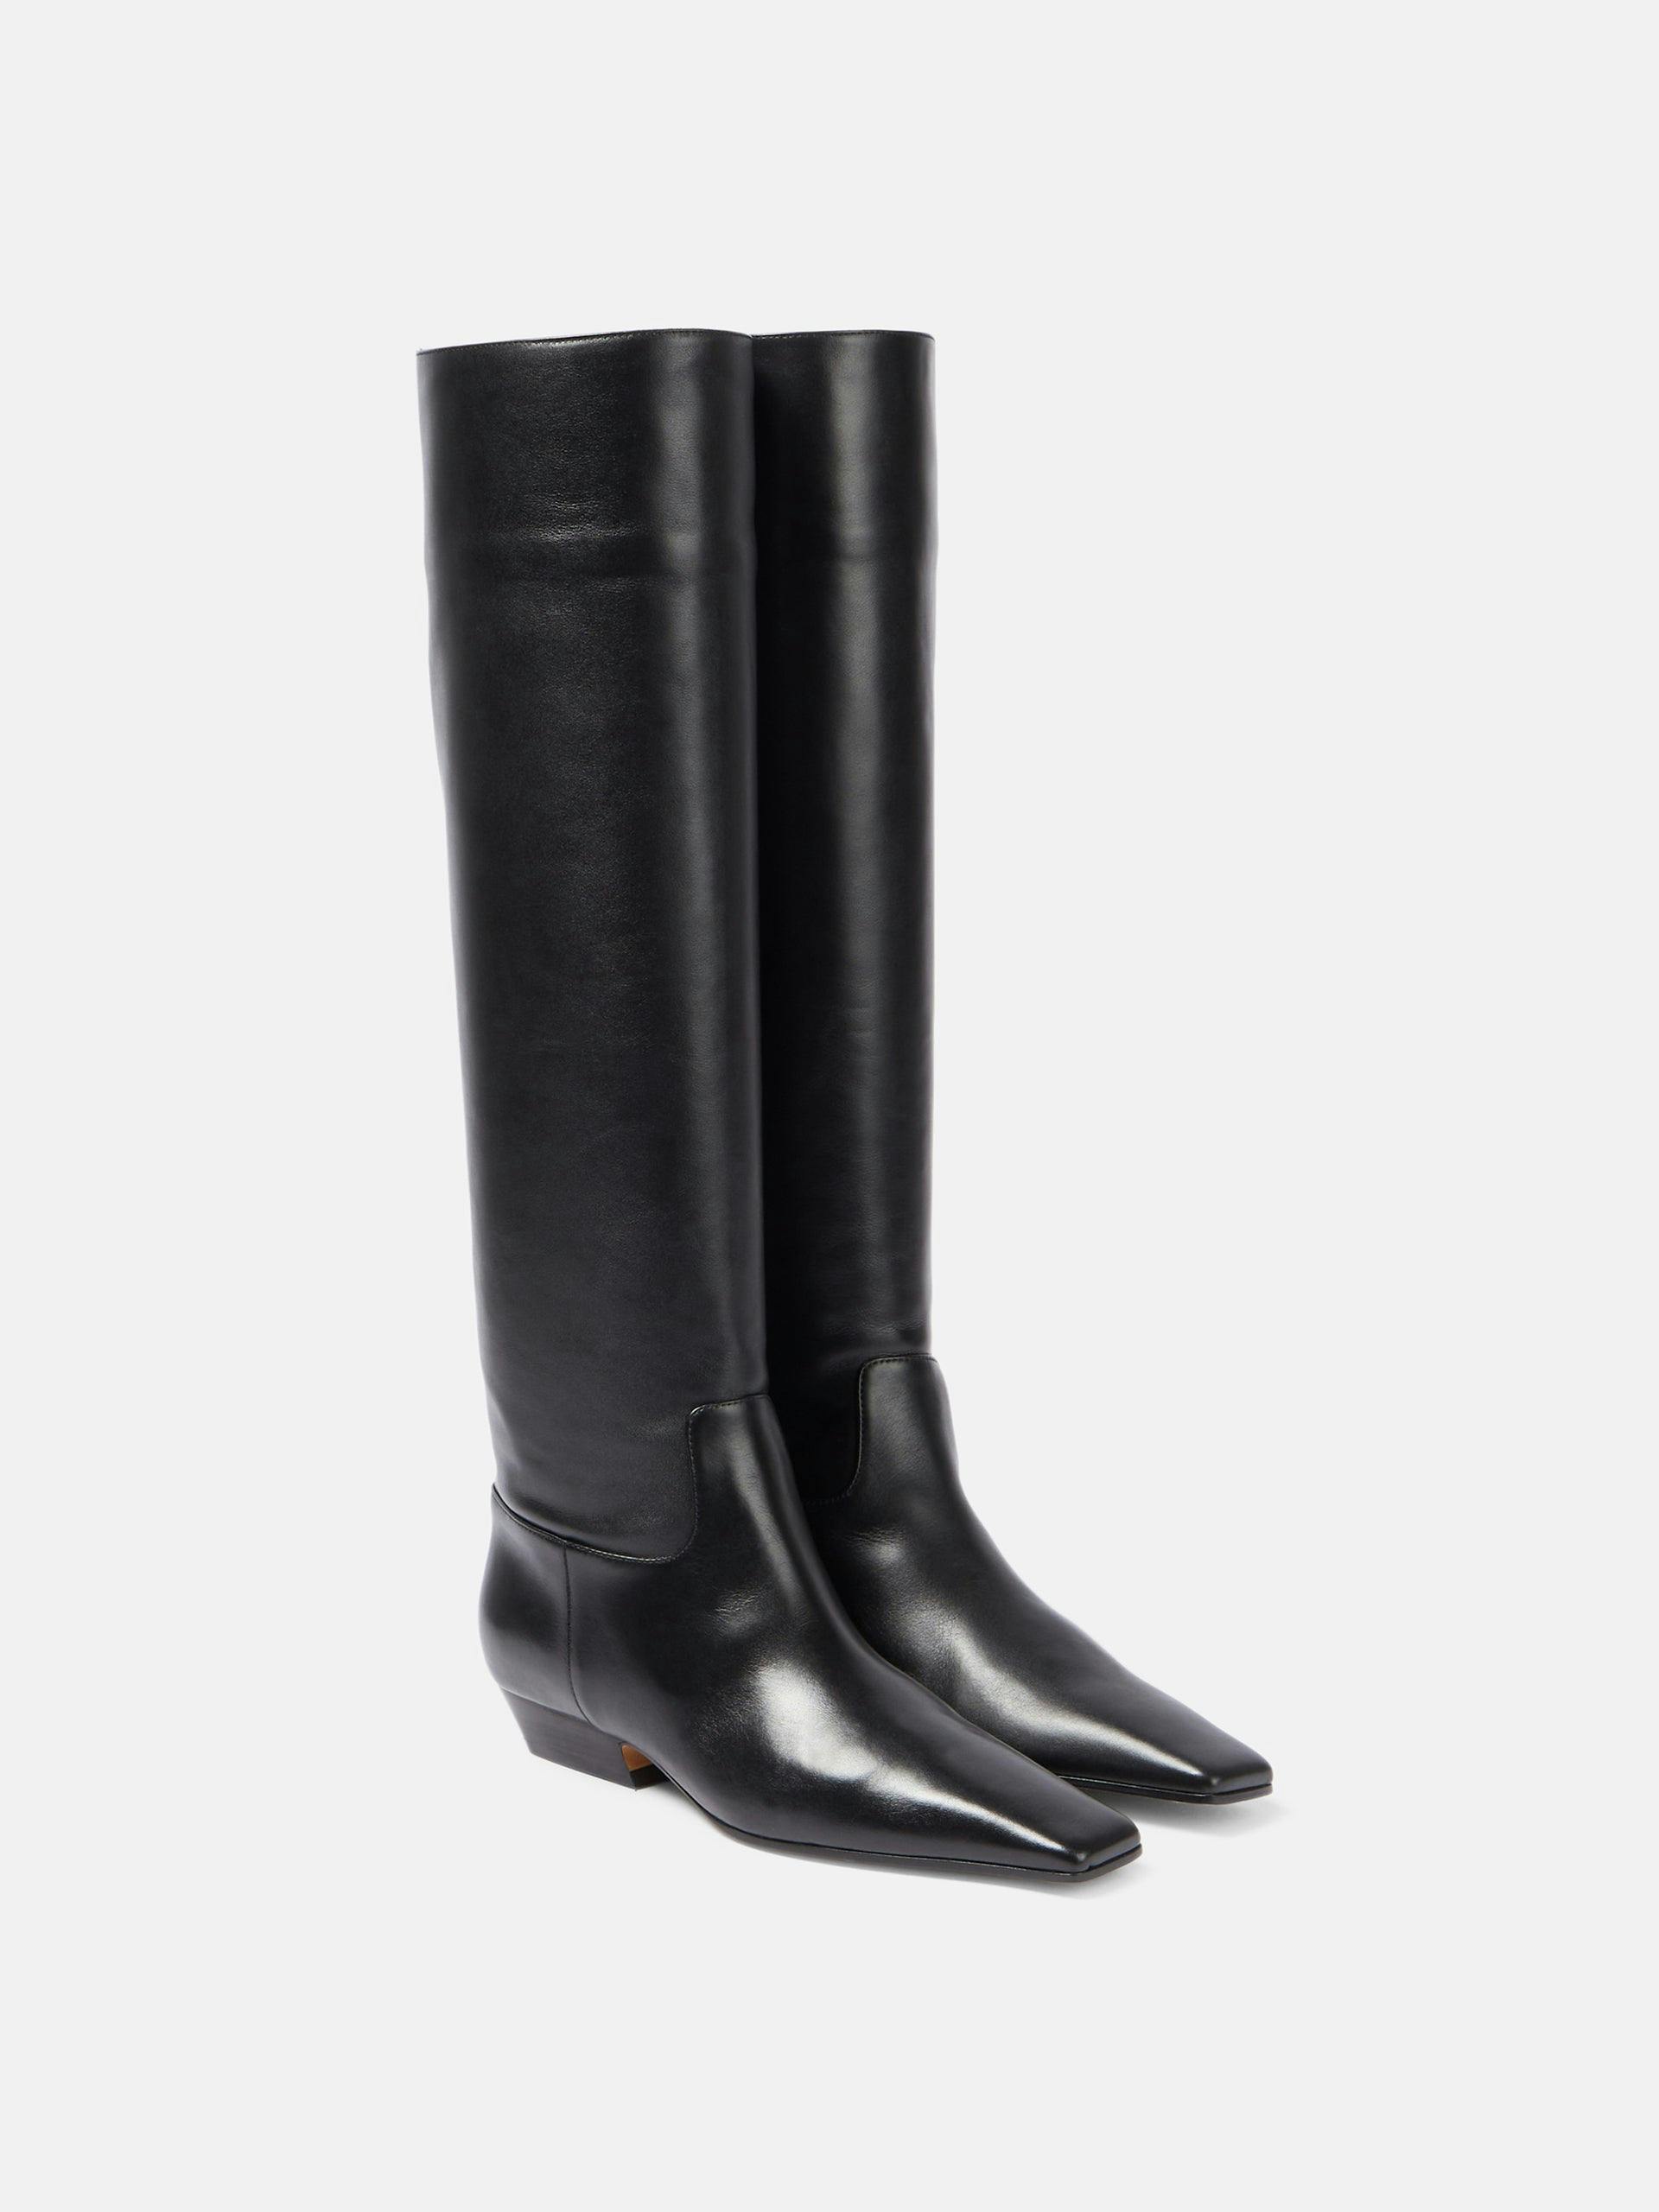 Black leather knee-high square-toe boots